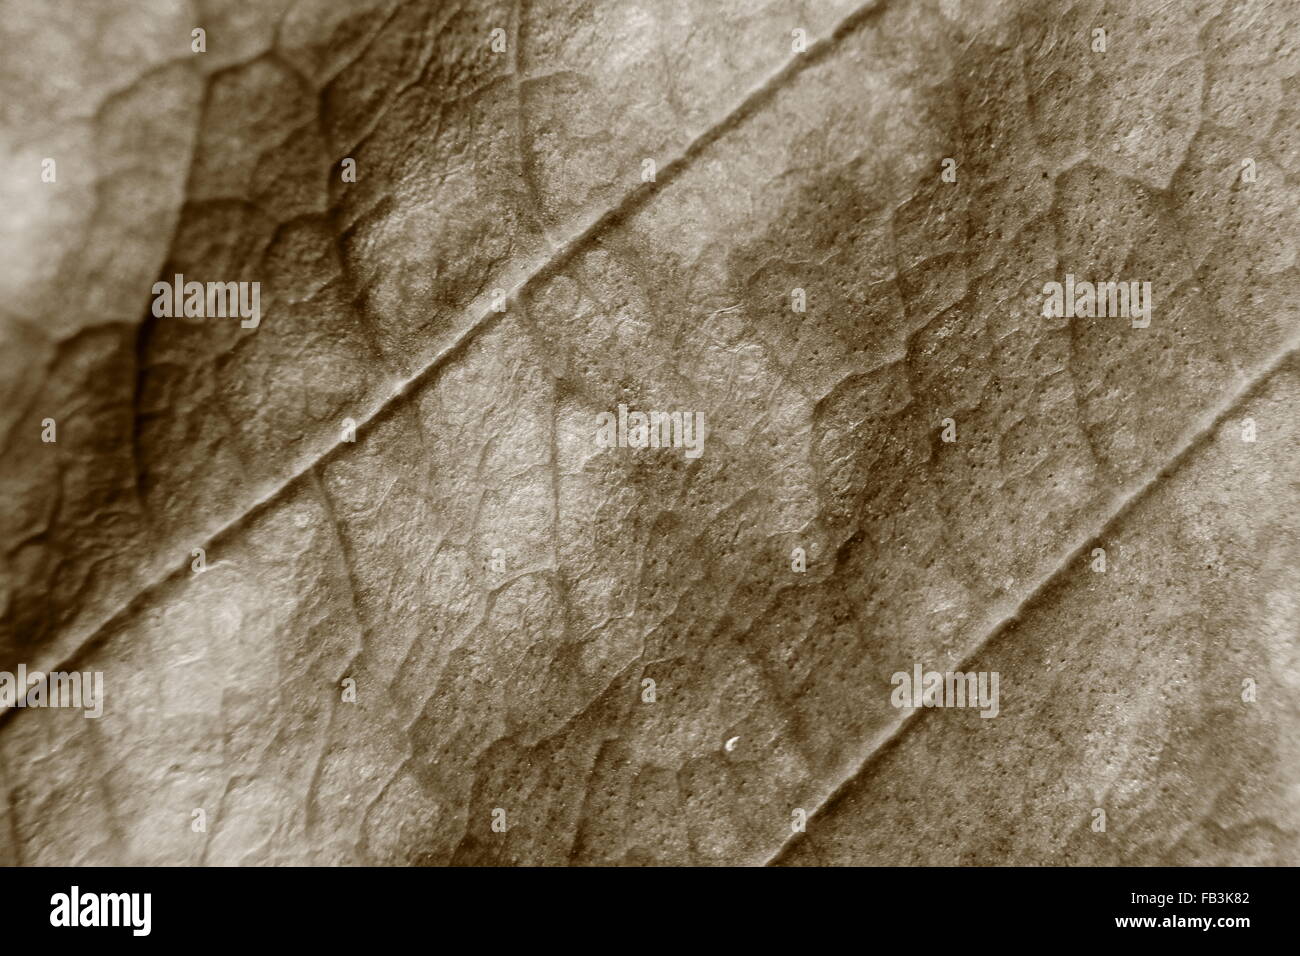 sepia tone blurry macro background of dry leaf, focus on center of the image, close-up to leaf vein. Stock Photo